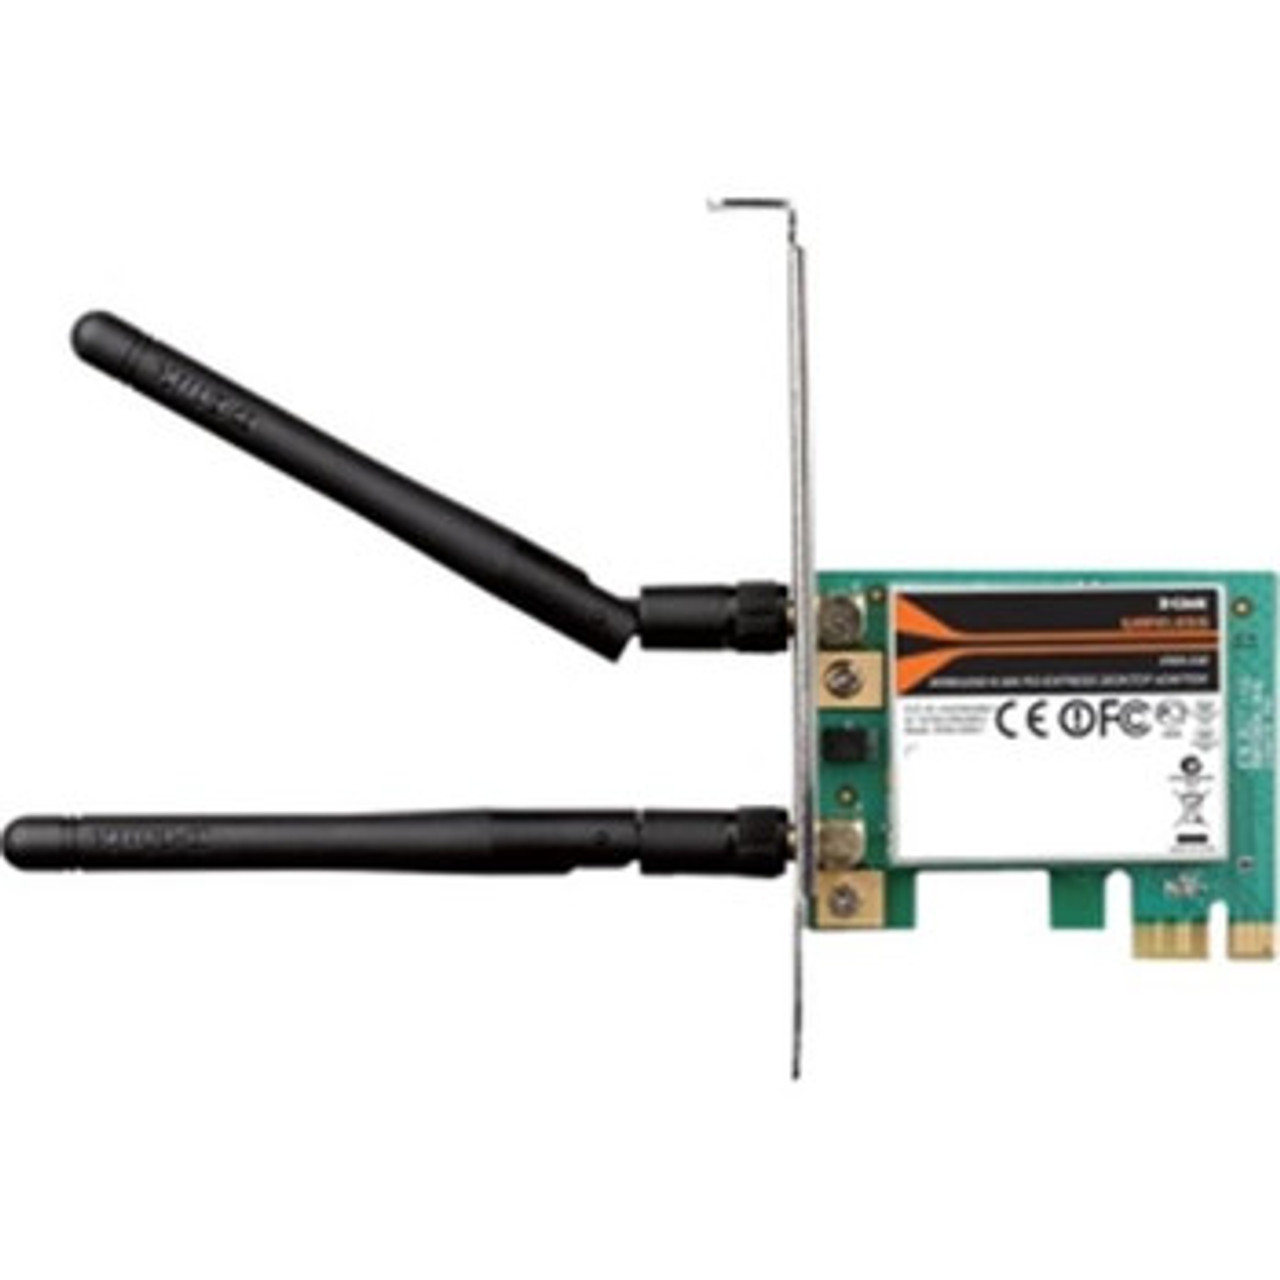 48EE0C223957 | D LINK |D-LINK Dwa-548 Single Band Wi-Fi N300 300Mbps Pci Express Network Adapter